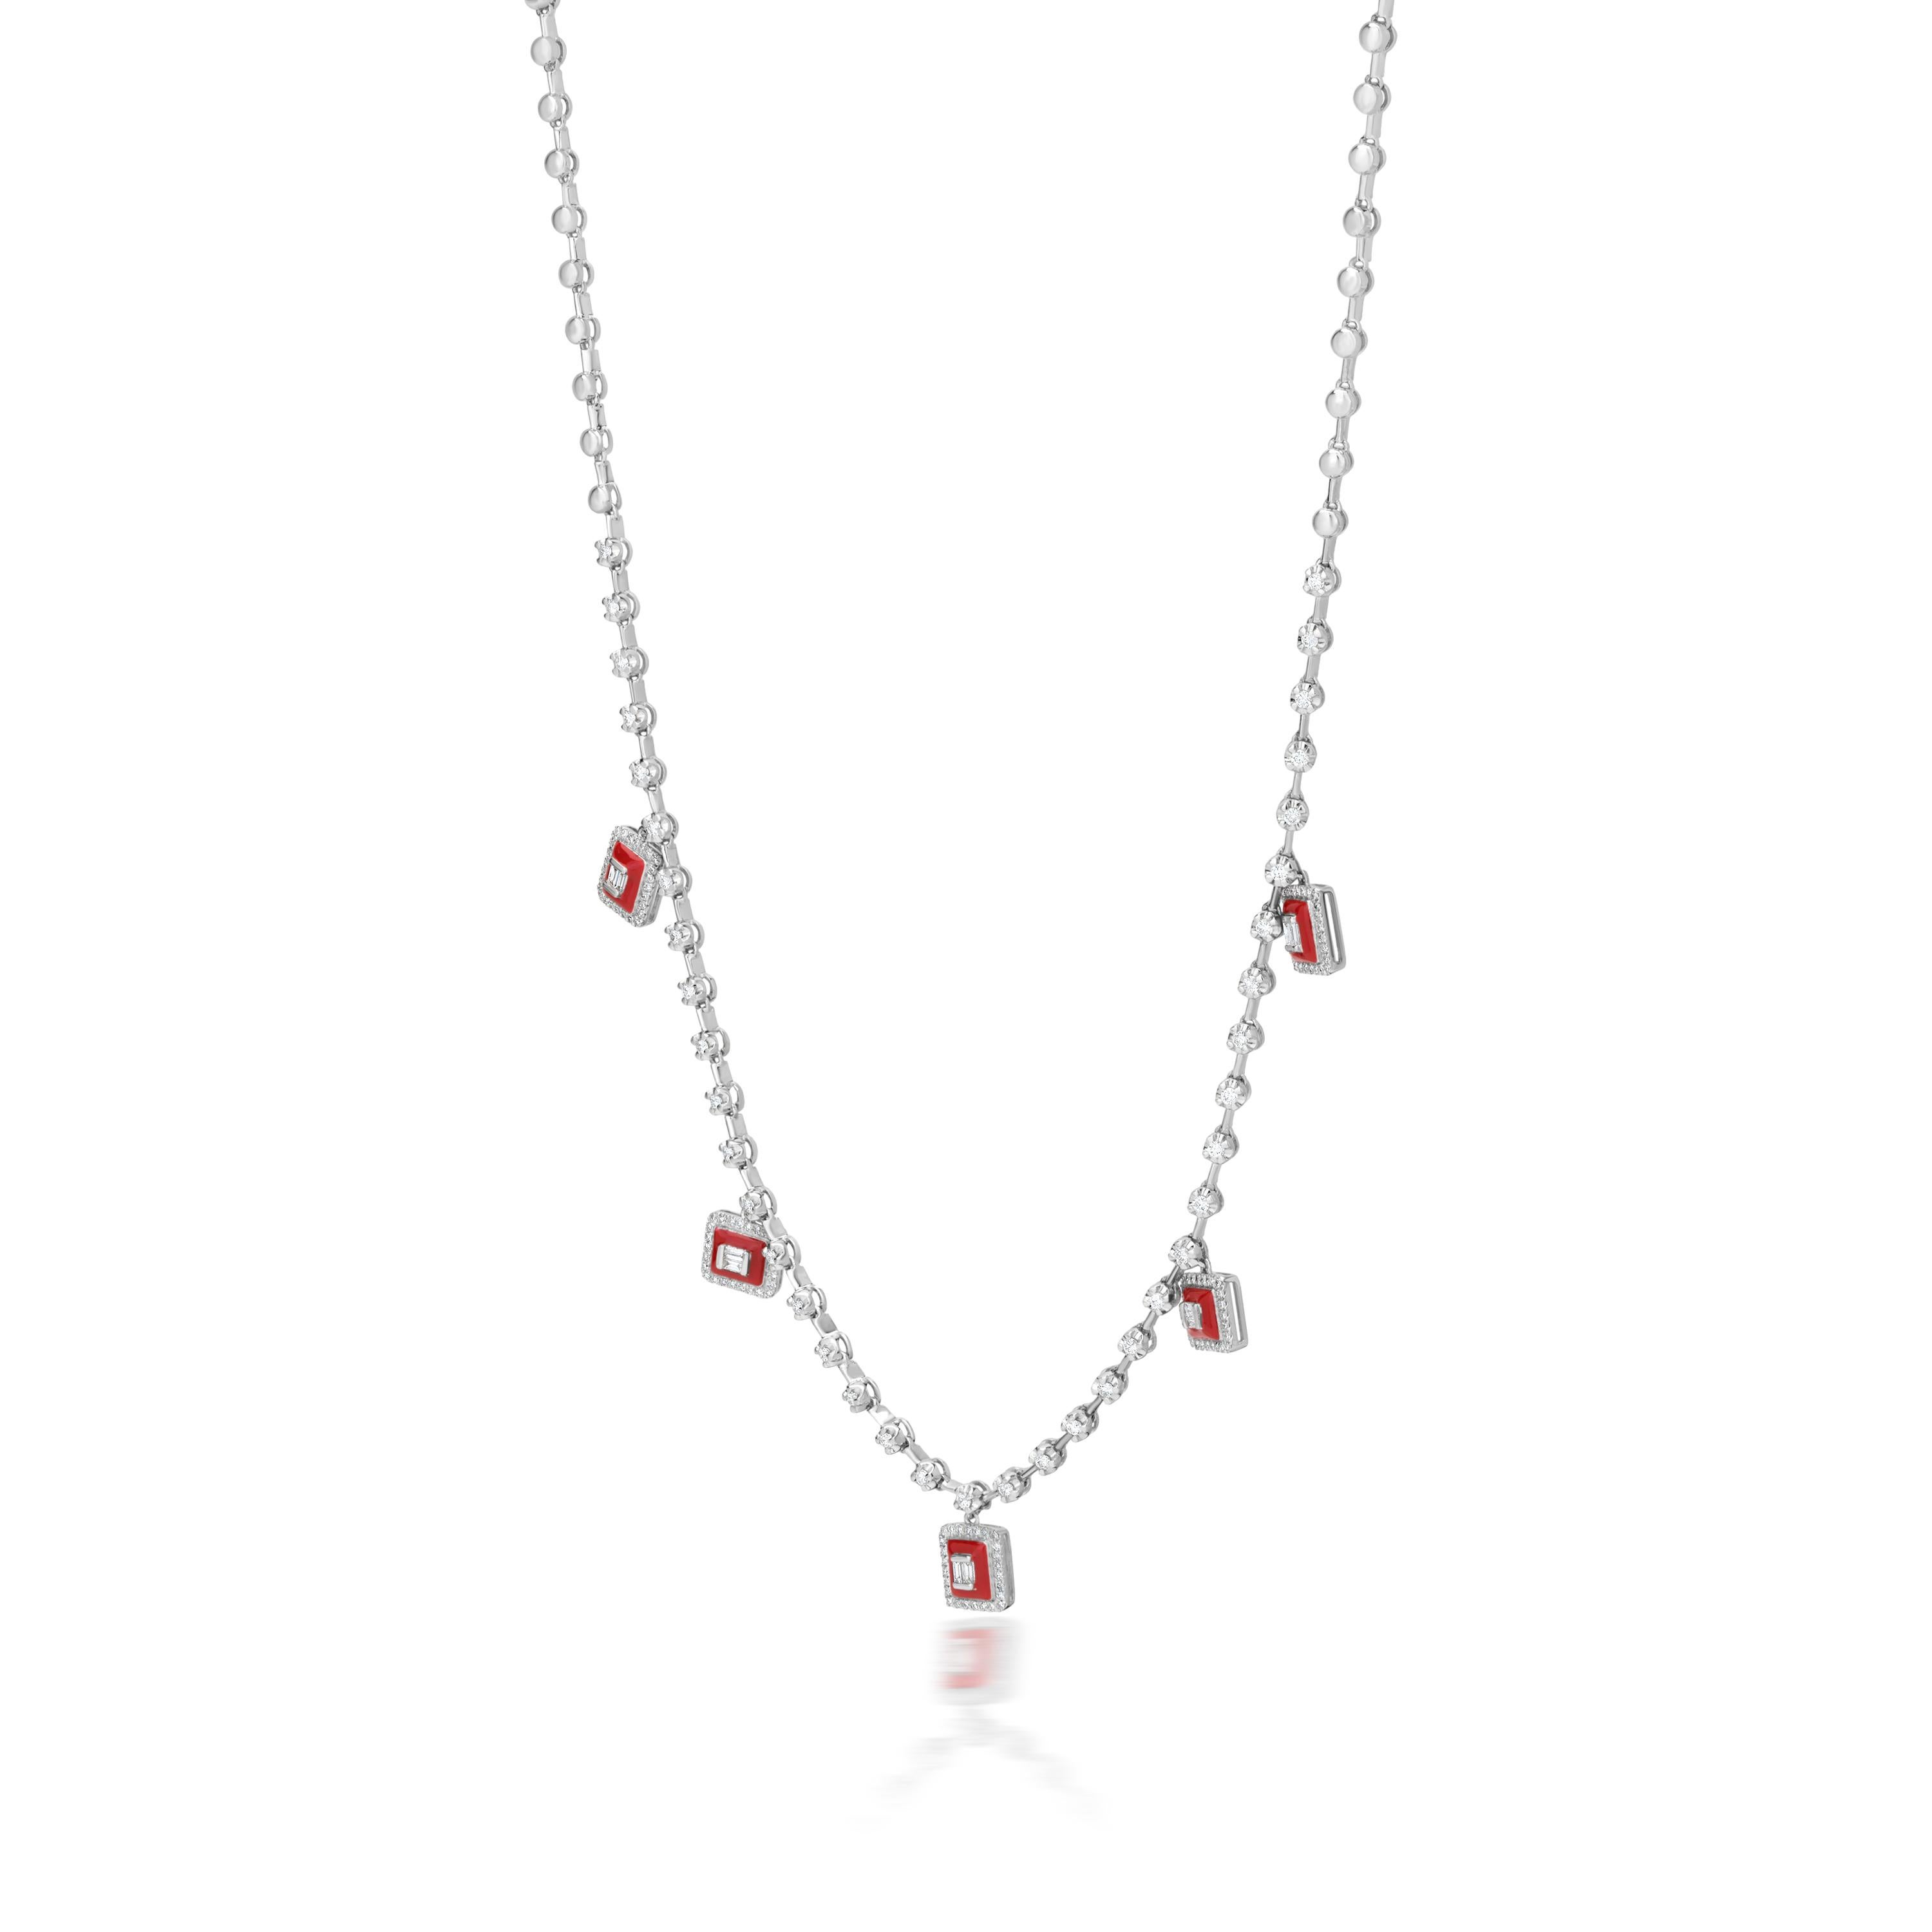 These Luxle Five rectangular charms are set in 18k white gold to depict a frame containing baguette diamond at center surrounded by red enamel and haloed by pave diamond rounds. The charms mesmerizingly hang from diamond studded gold chain.  Lobster